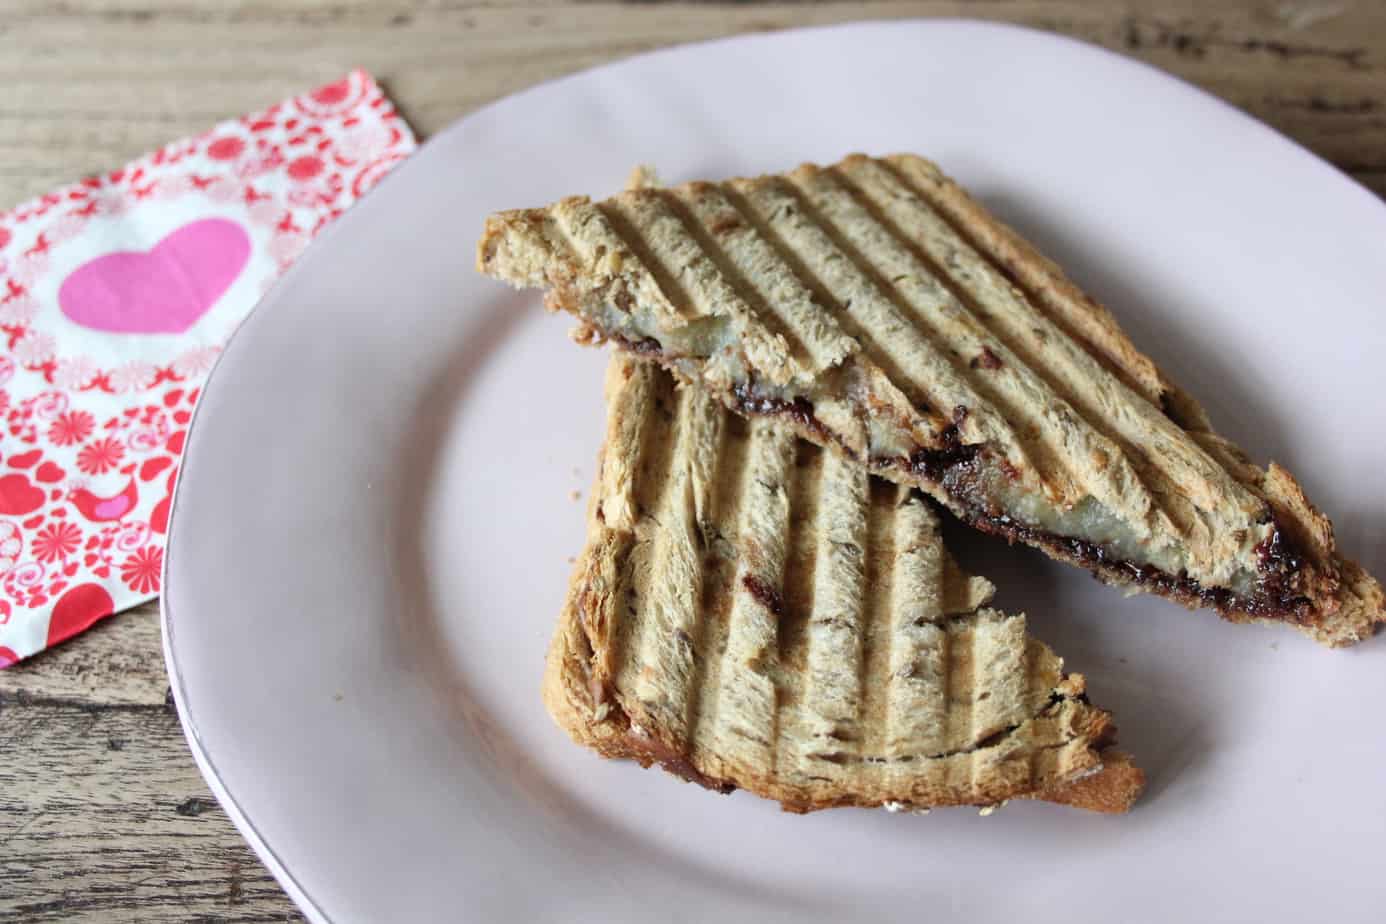 LUNCHTIME #Nutella/Banaan tosti